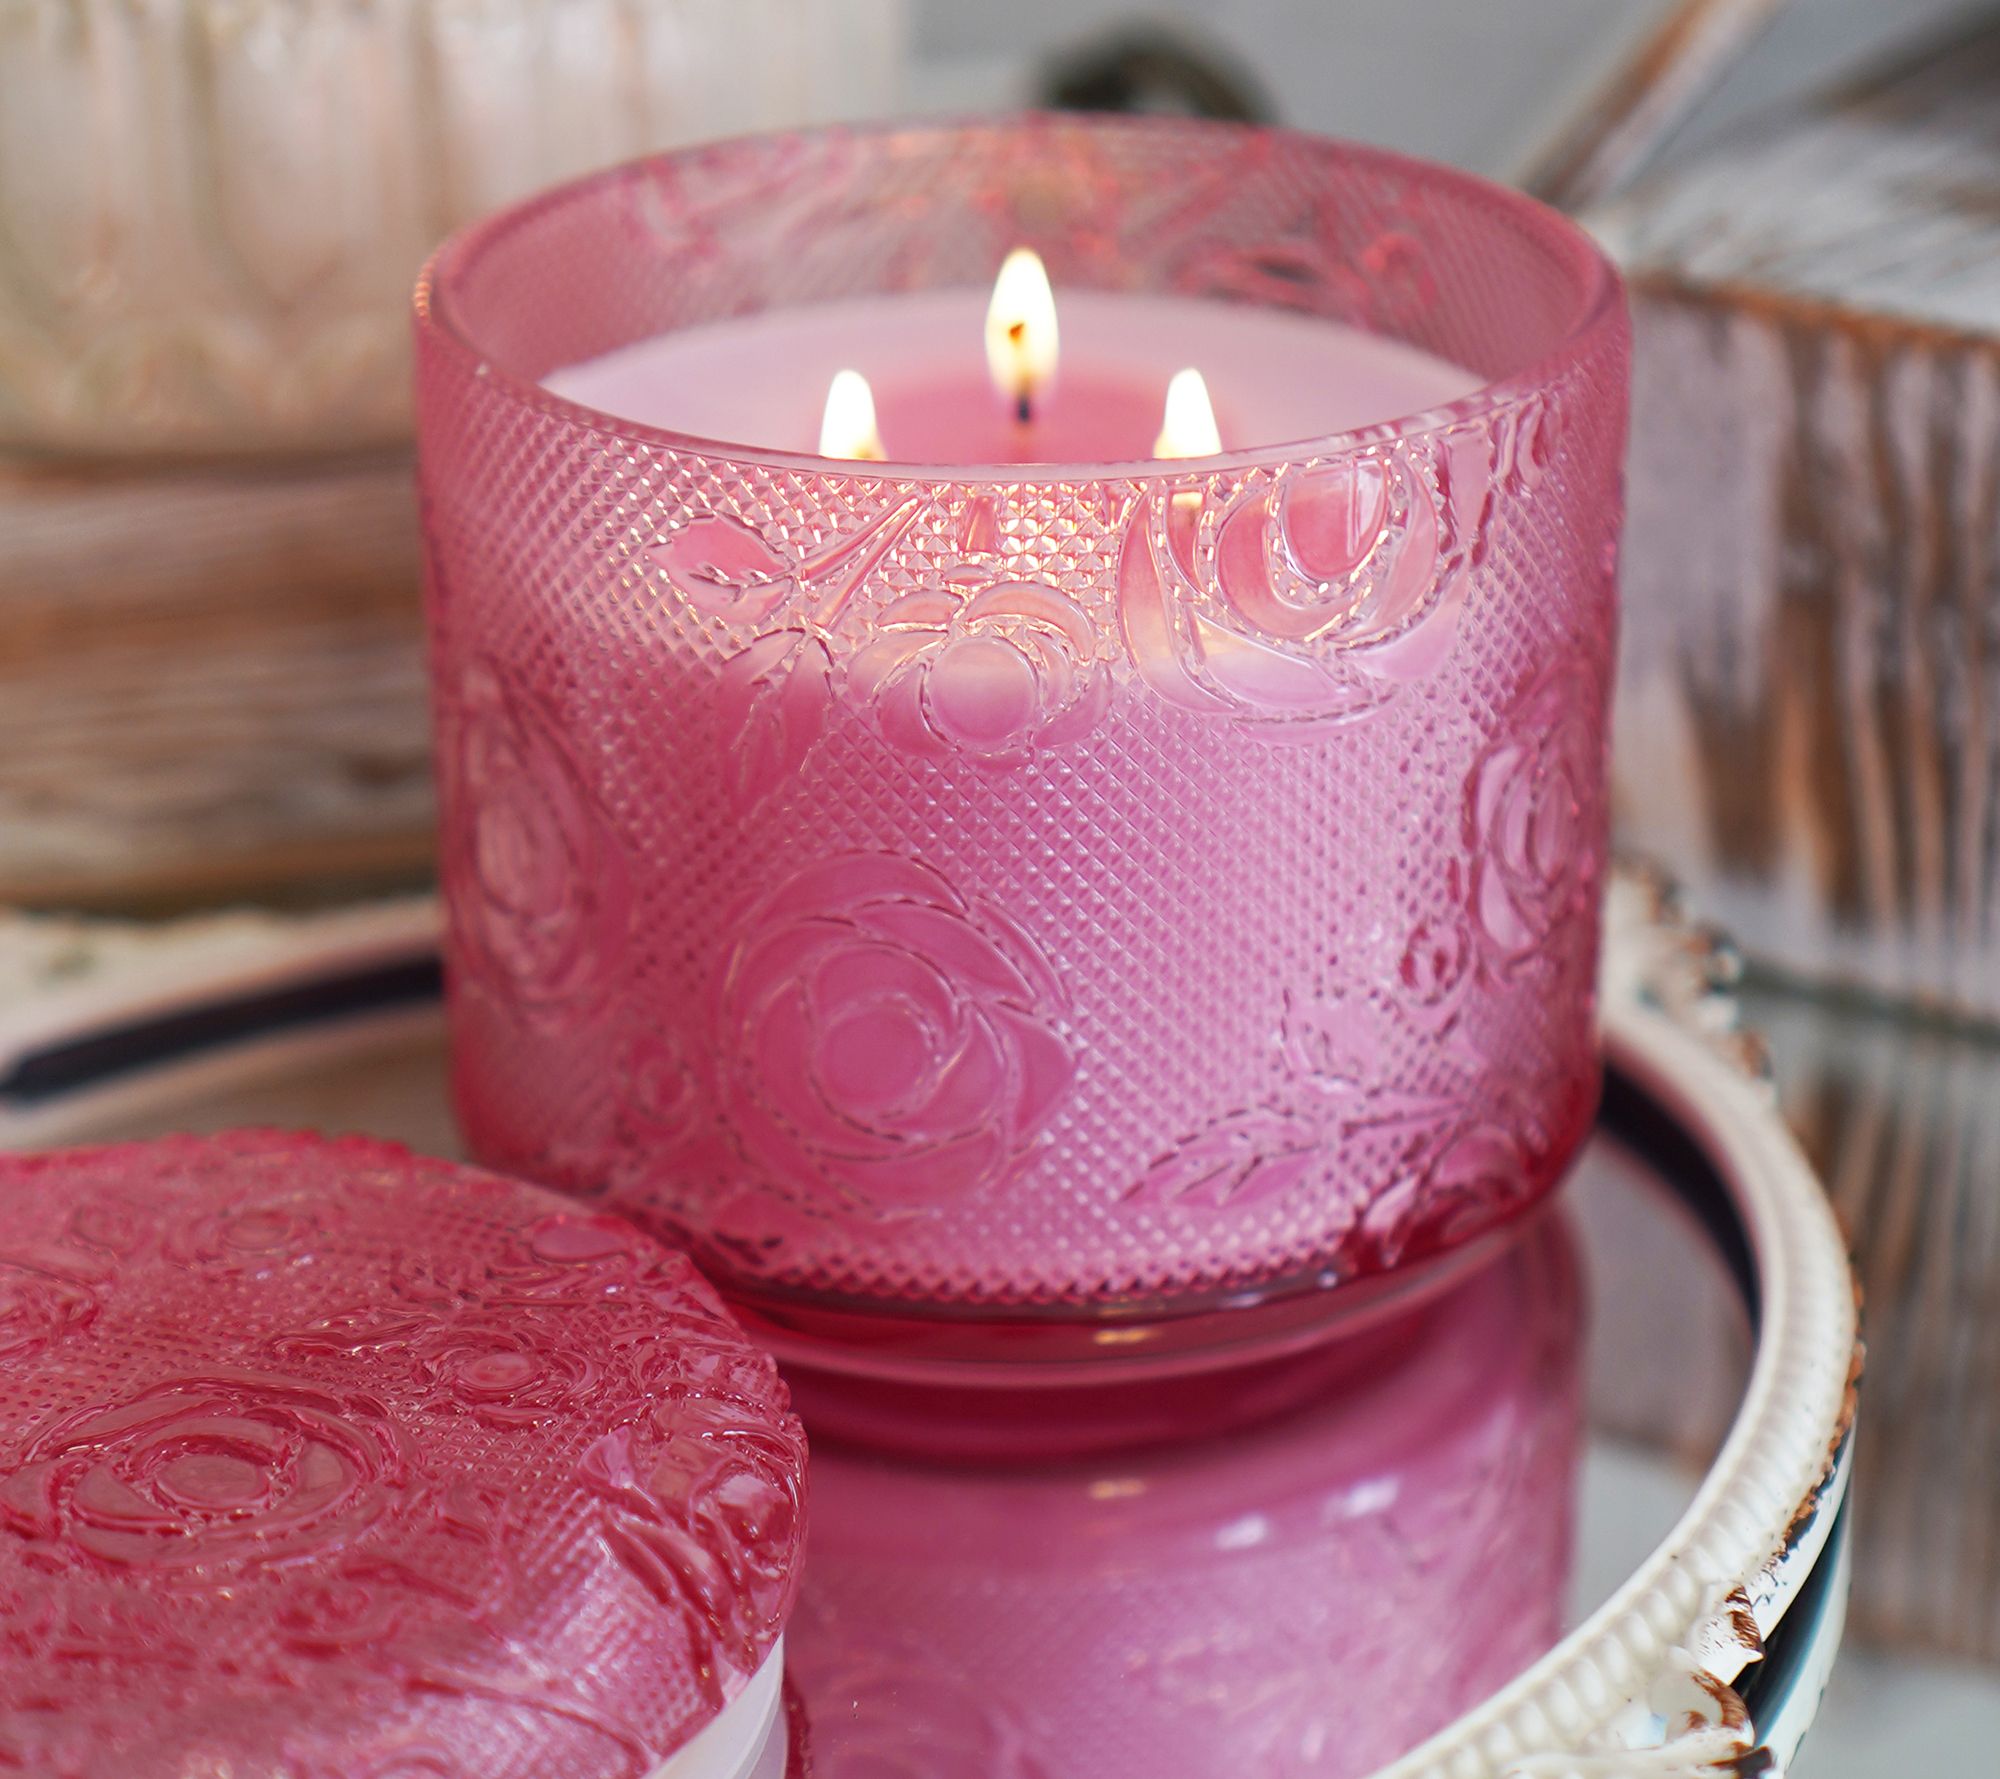 Purchase Wholesale thymes candles. Free Returns & Net 60 Terms on